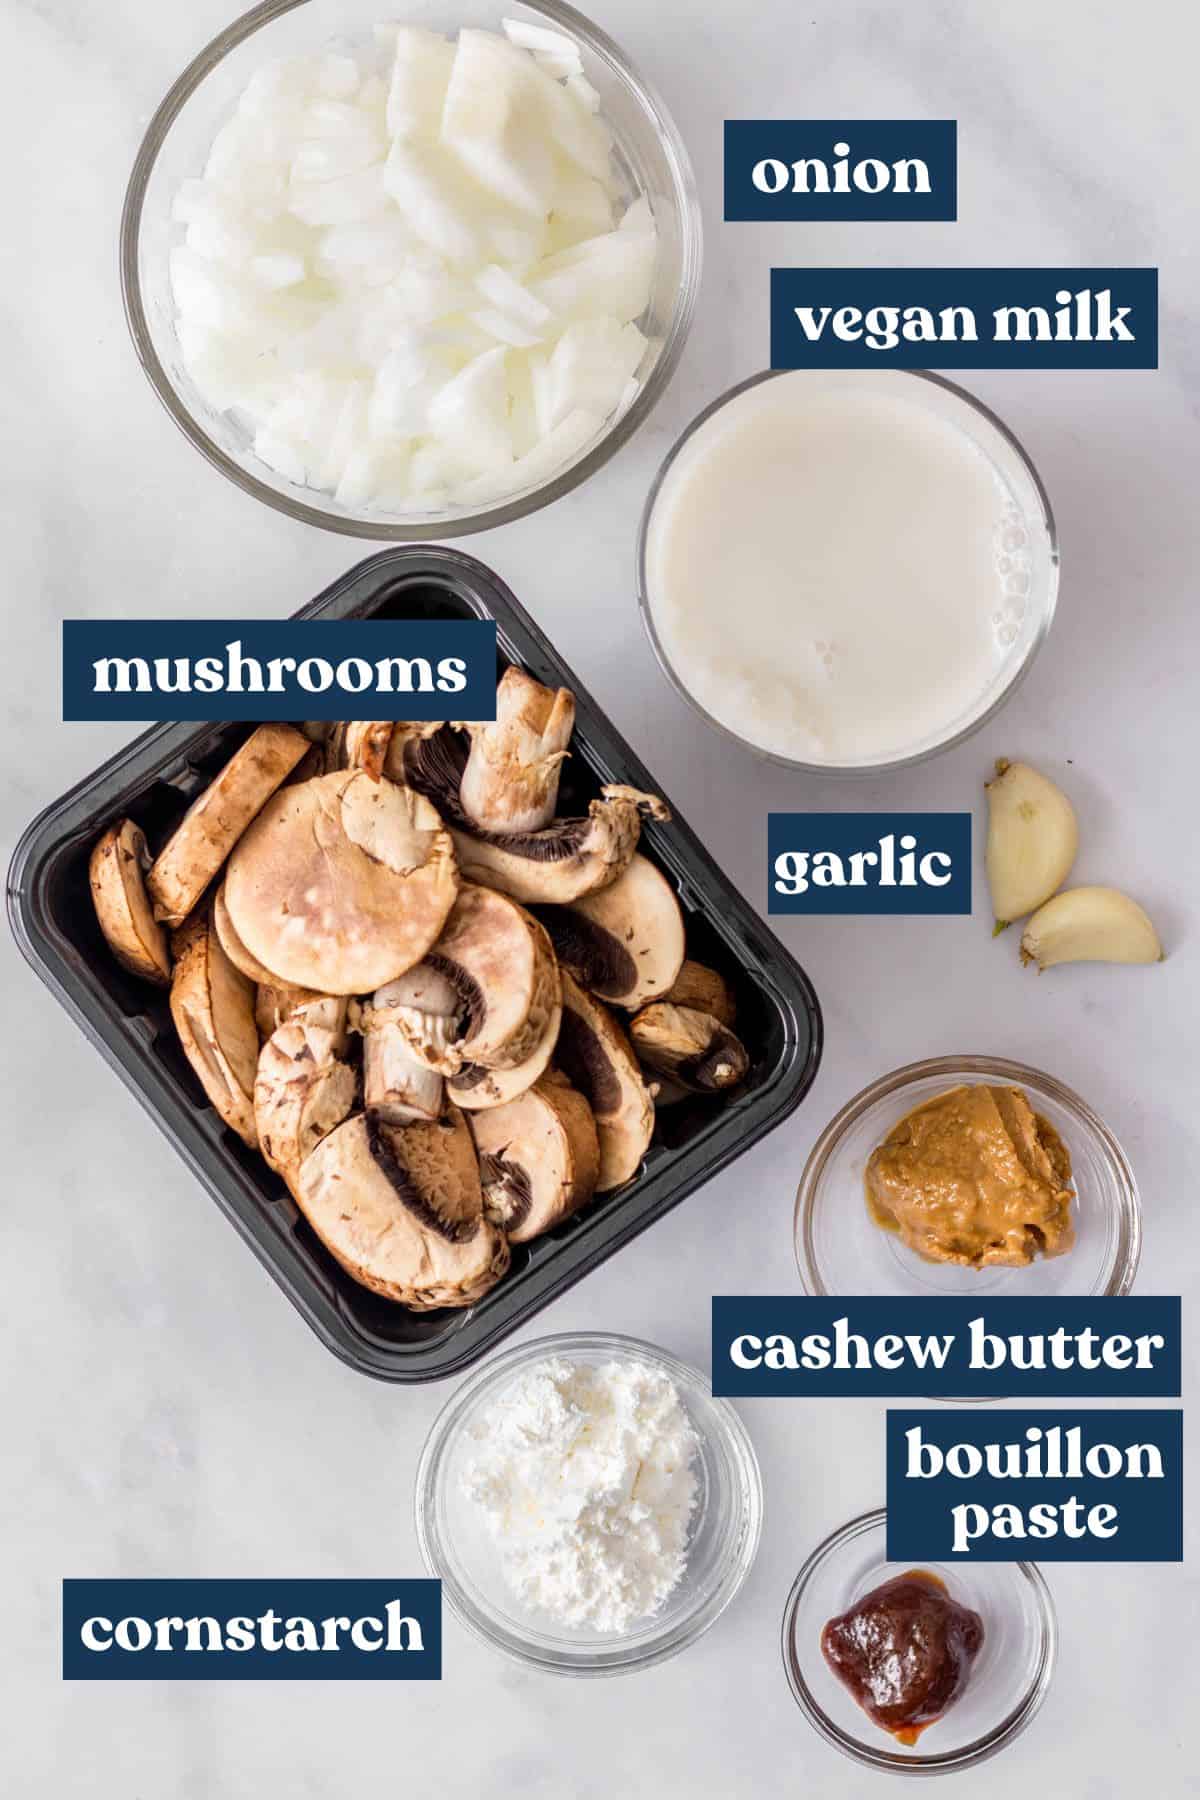 Ingredients needed to make condensed mushroom soup measured and labeled.